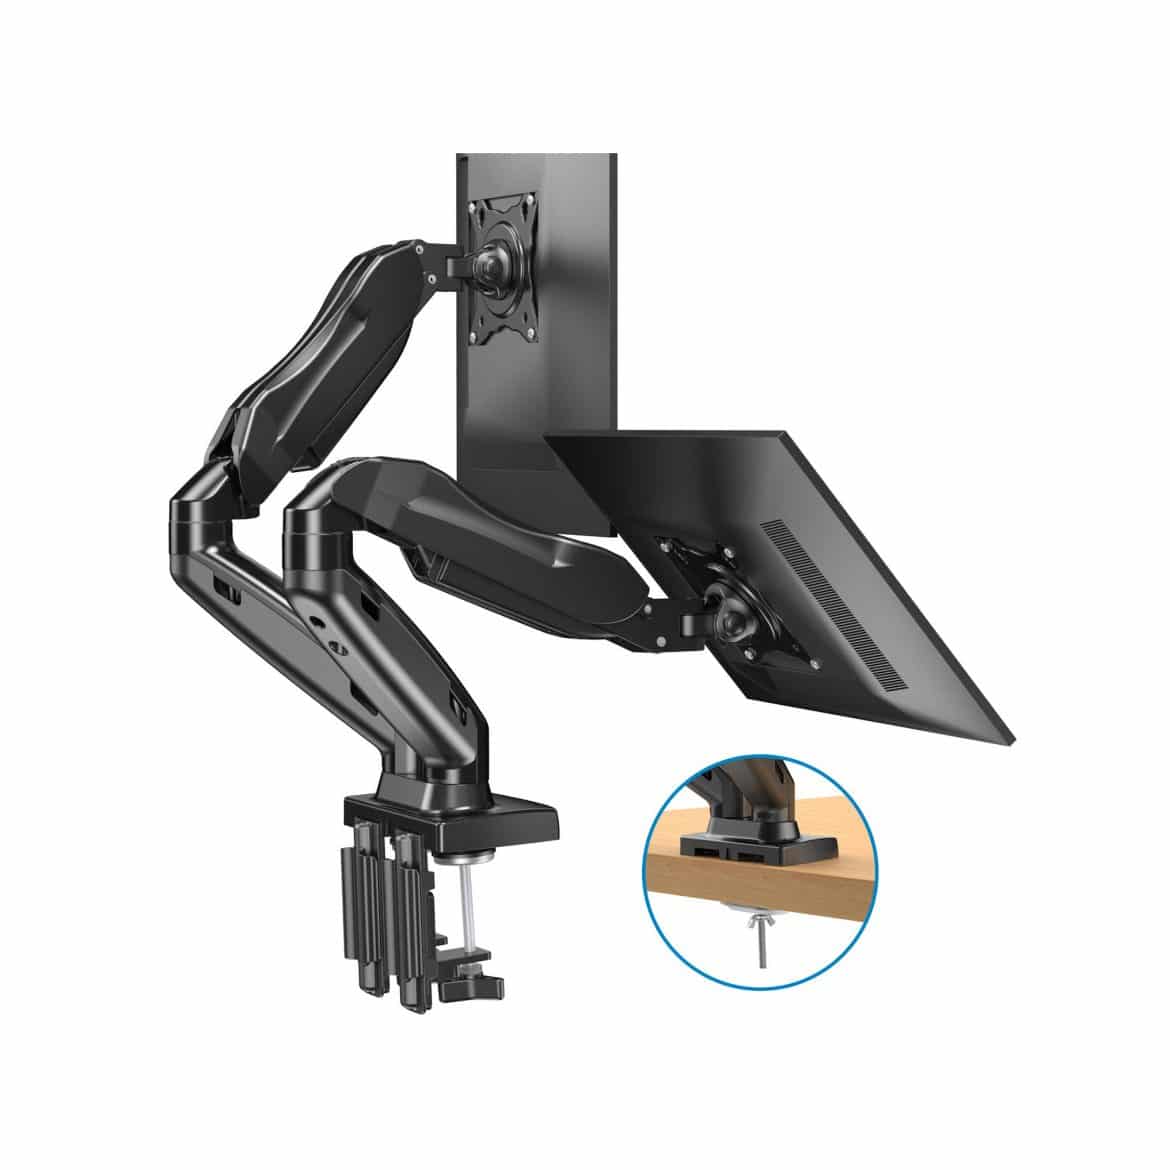 Top 10 Best Monitor Arms in 2021 Reviews | Buyer's Guide